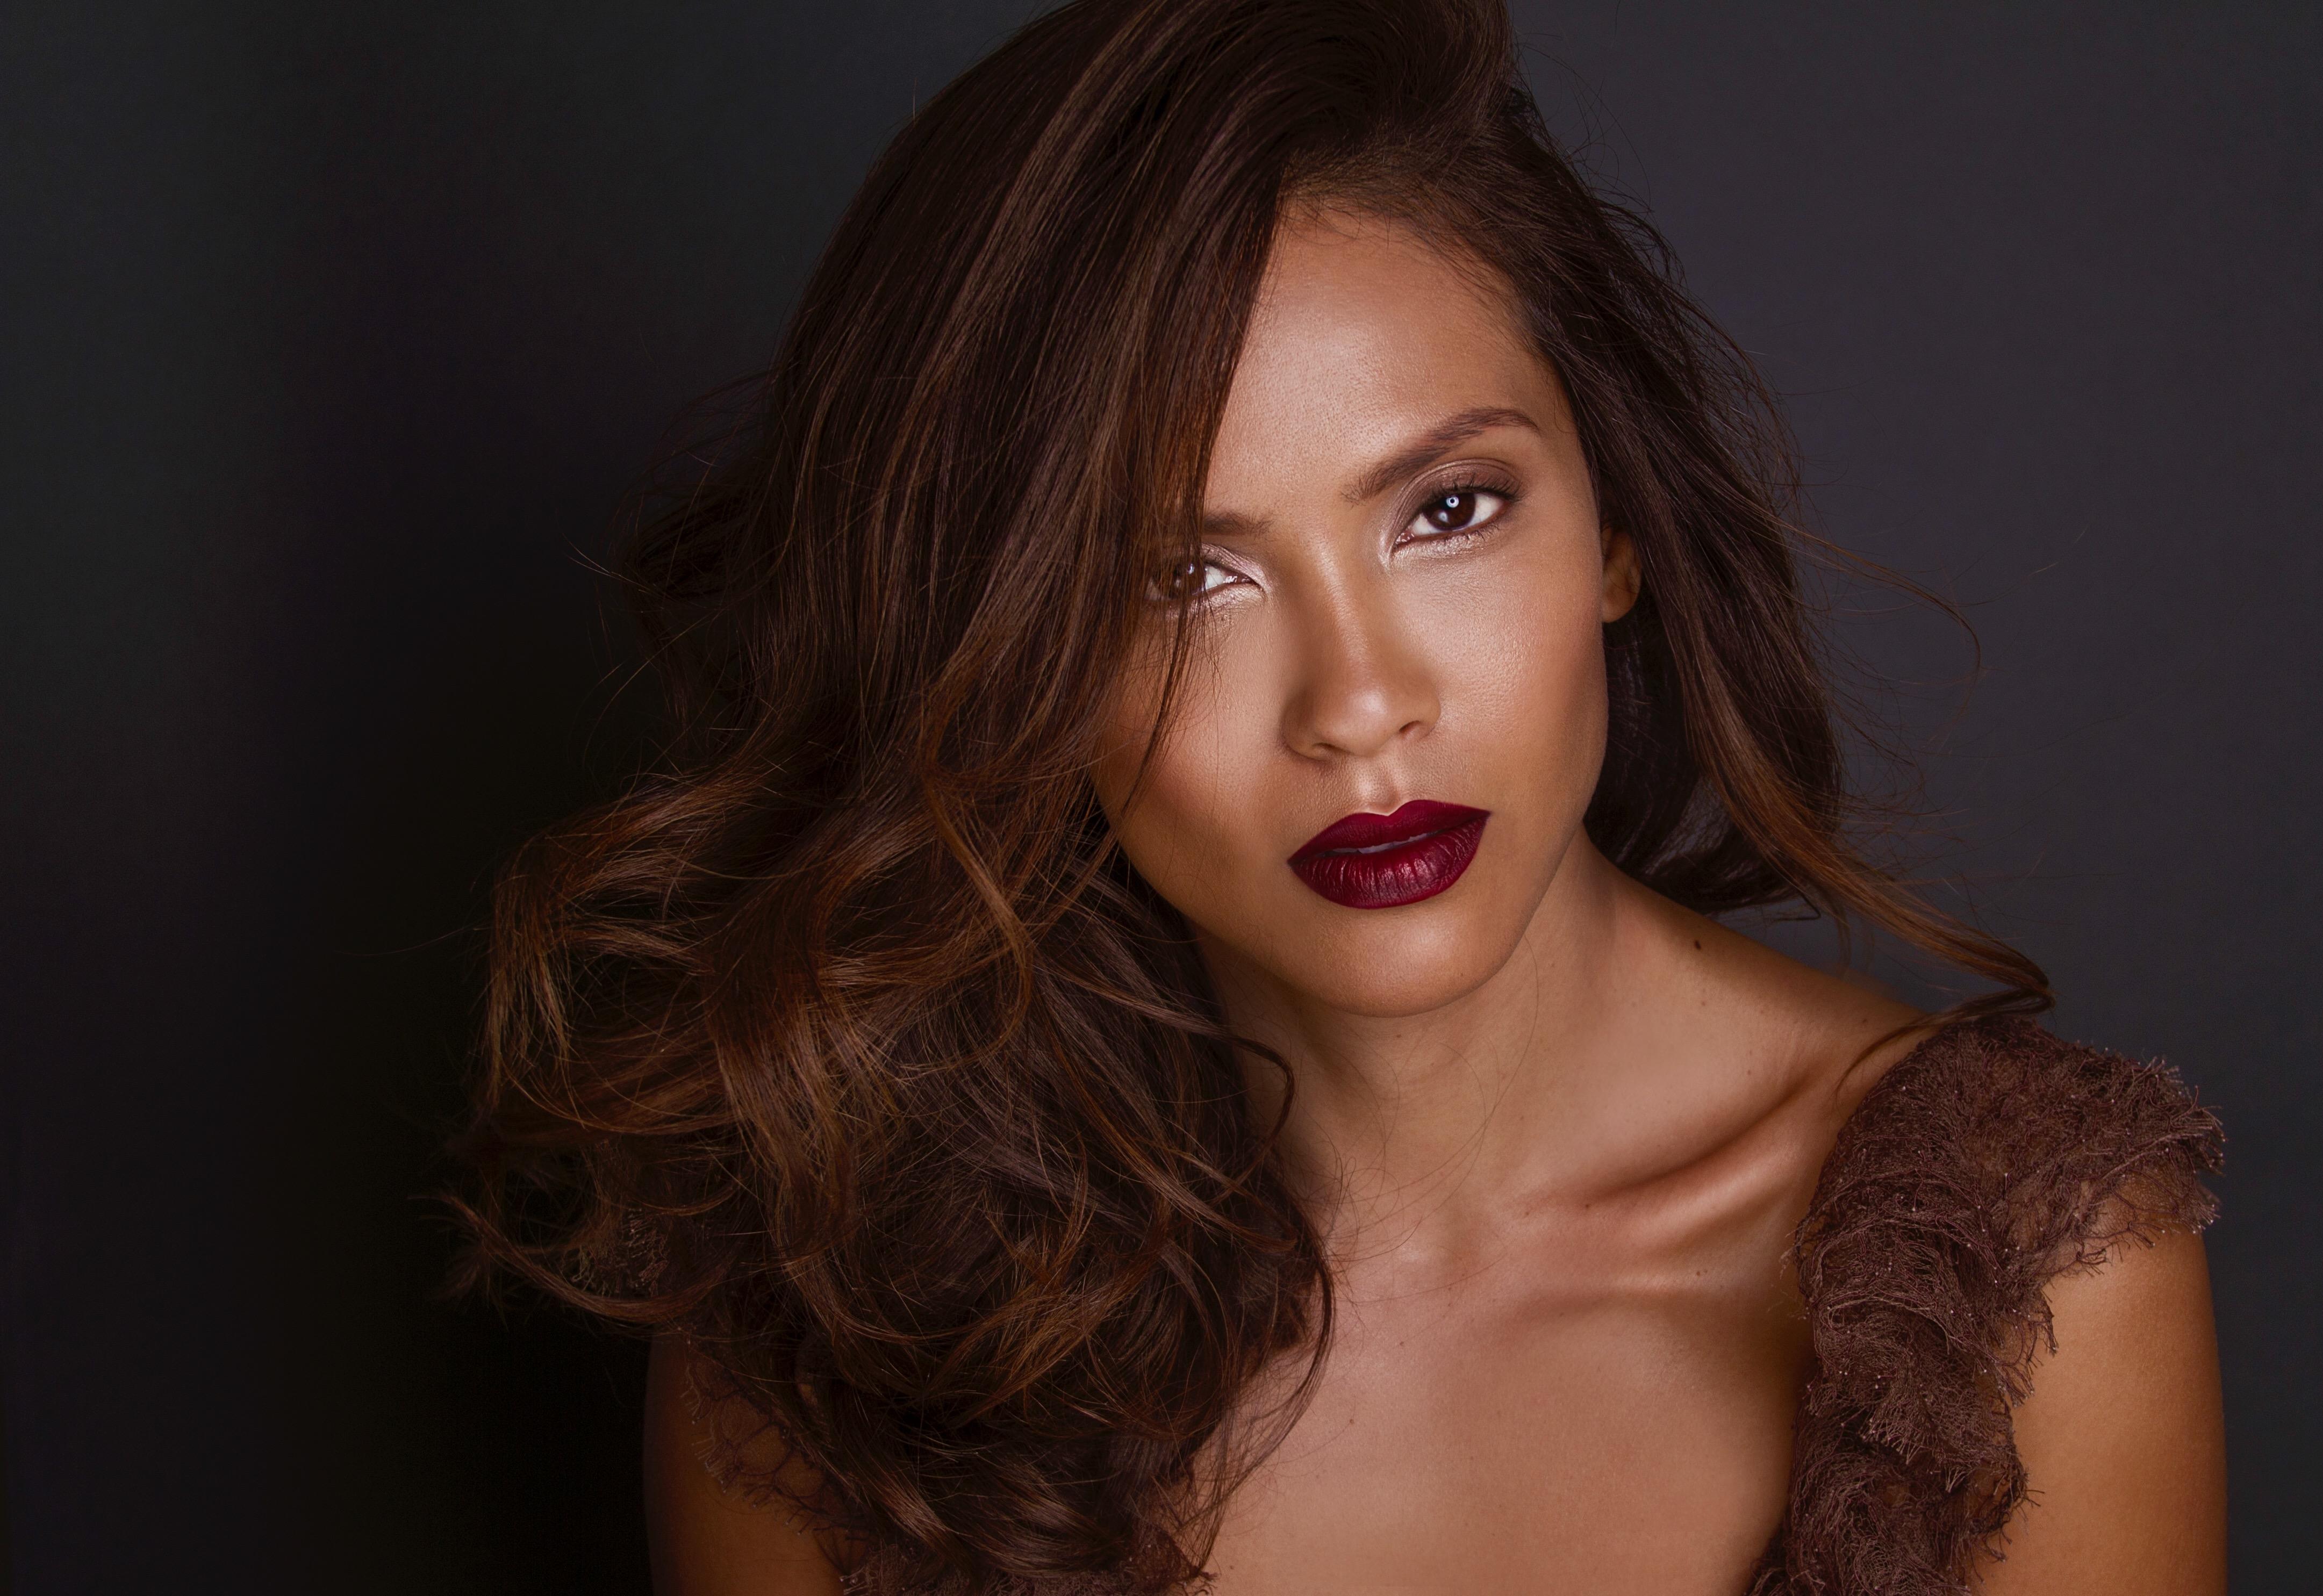 5 Things To Know About 'Lucifer' Star Lesley-Ann Brandt